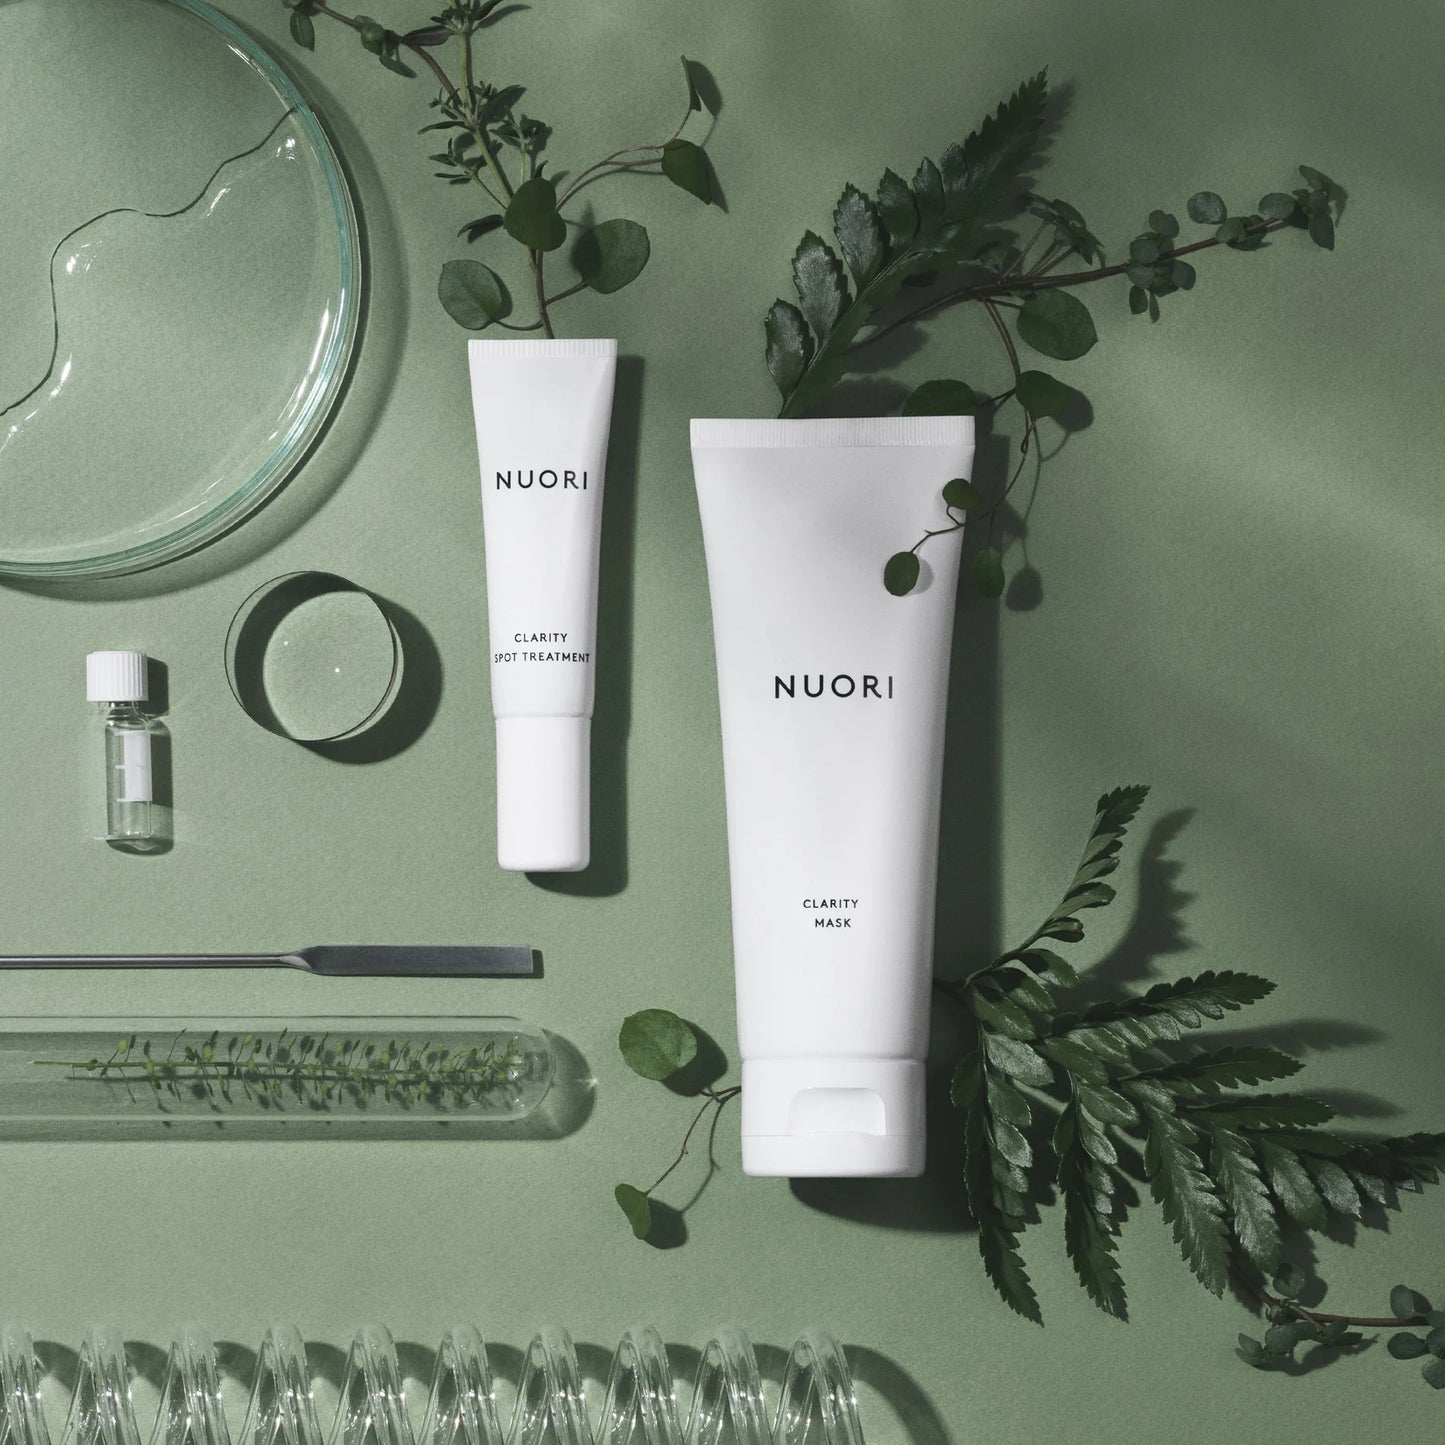 The best clay mask by nuori.